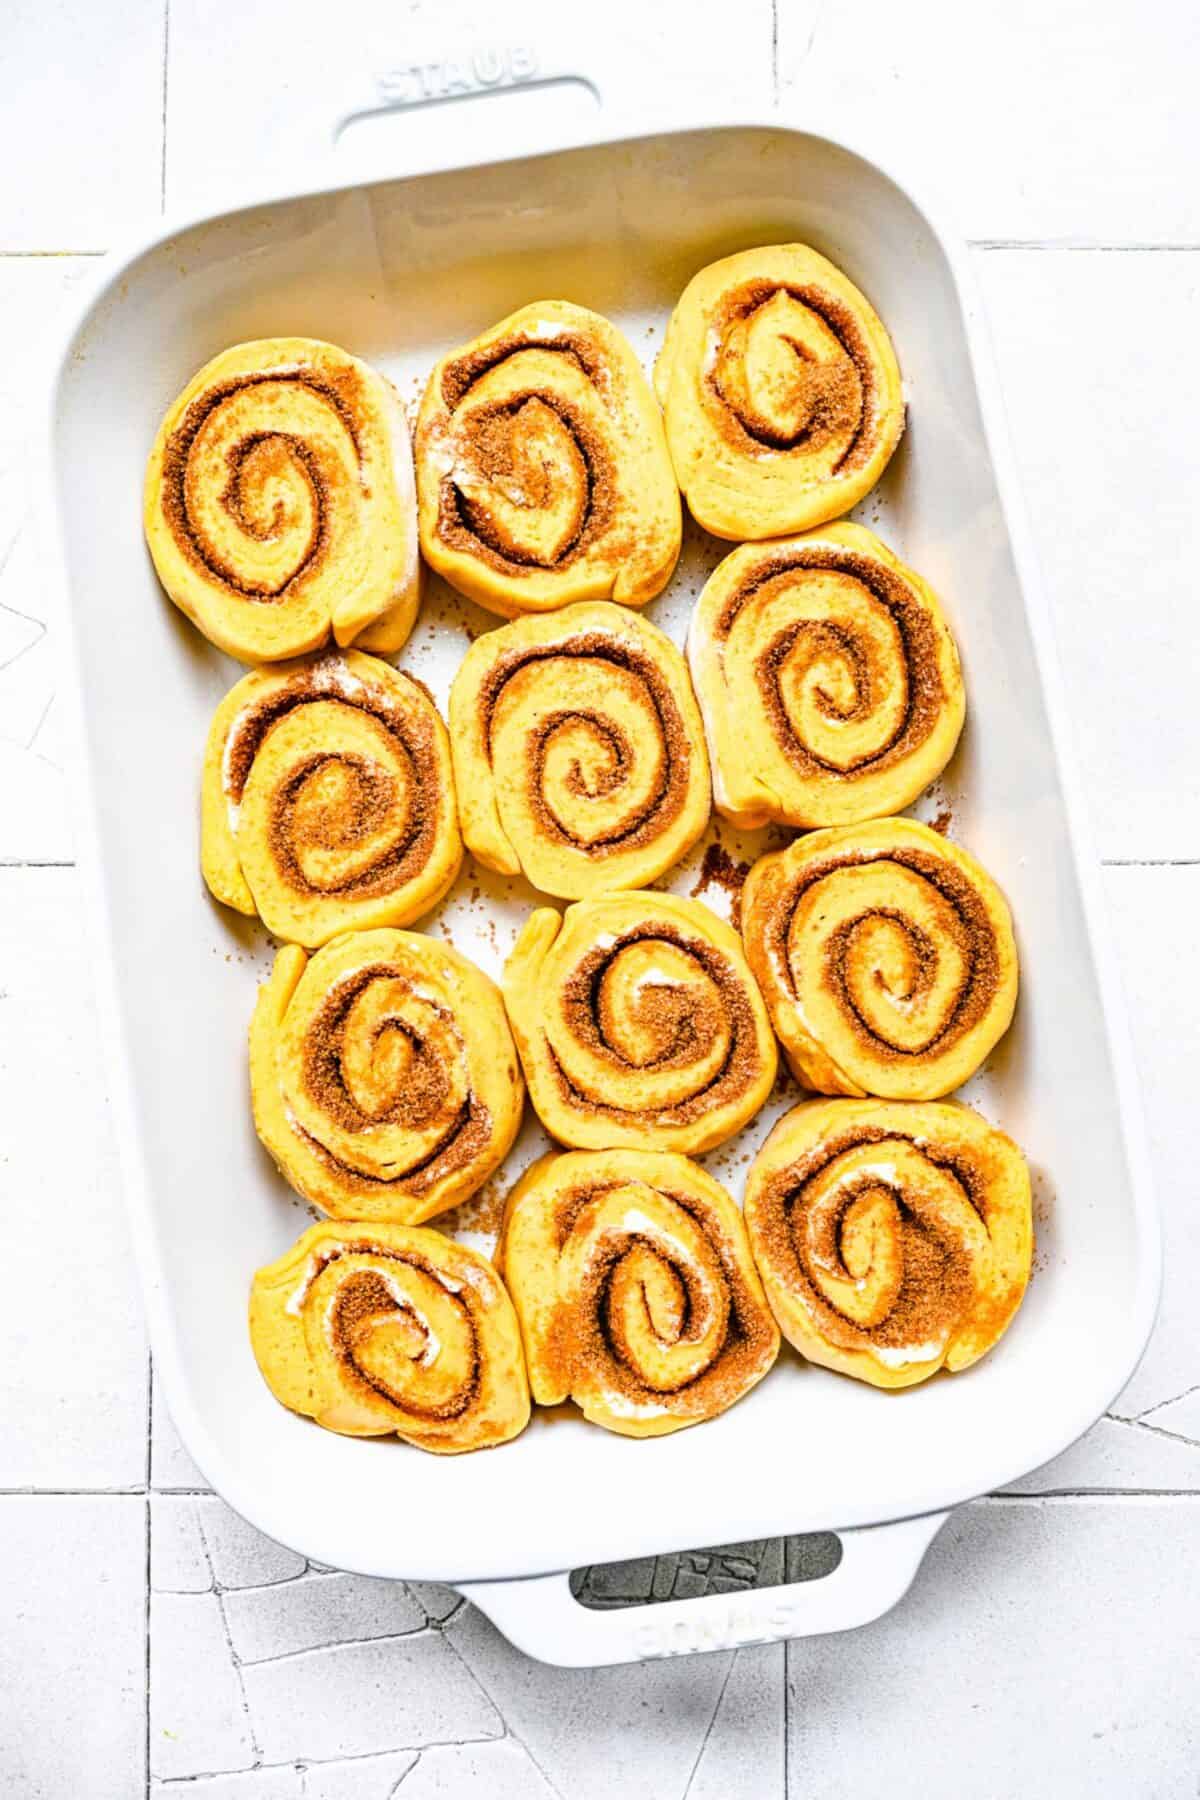 Overhead view of a baking tray with 12 unbaked pumpkin cinnamon rolls